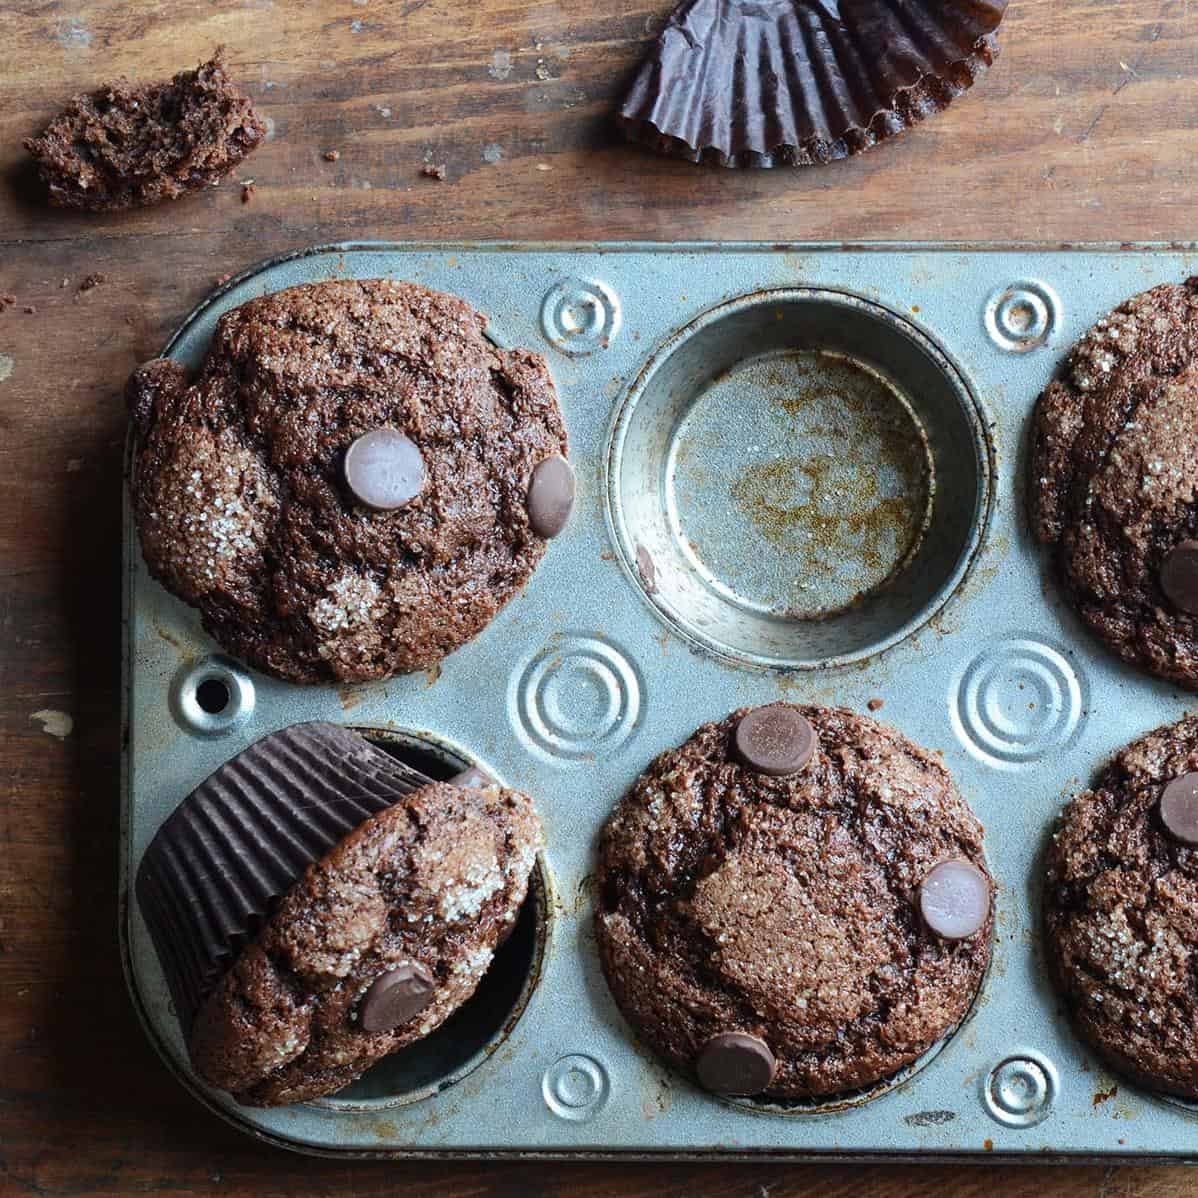  These muffins are as delicious as they are beautiful.